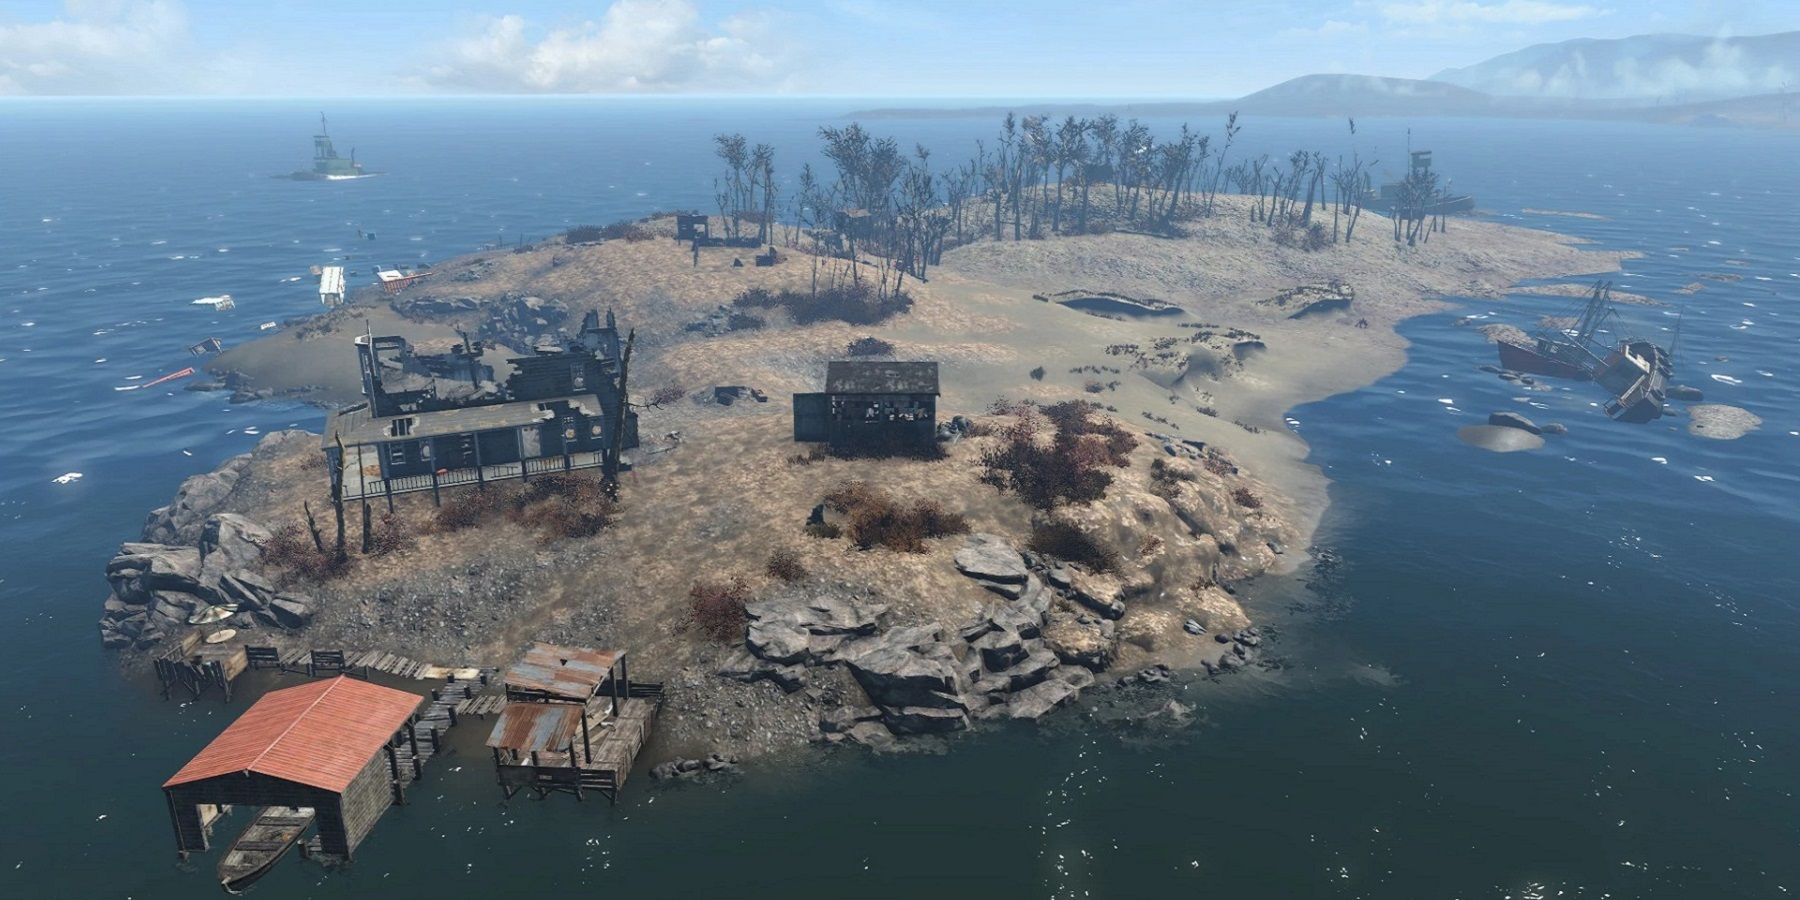 Impressive Fallout 4 Project Turns Spectacle Island Into a City